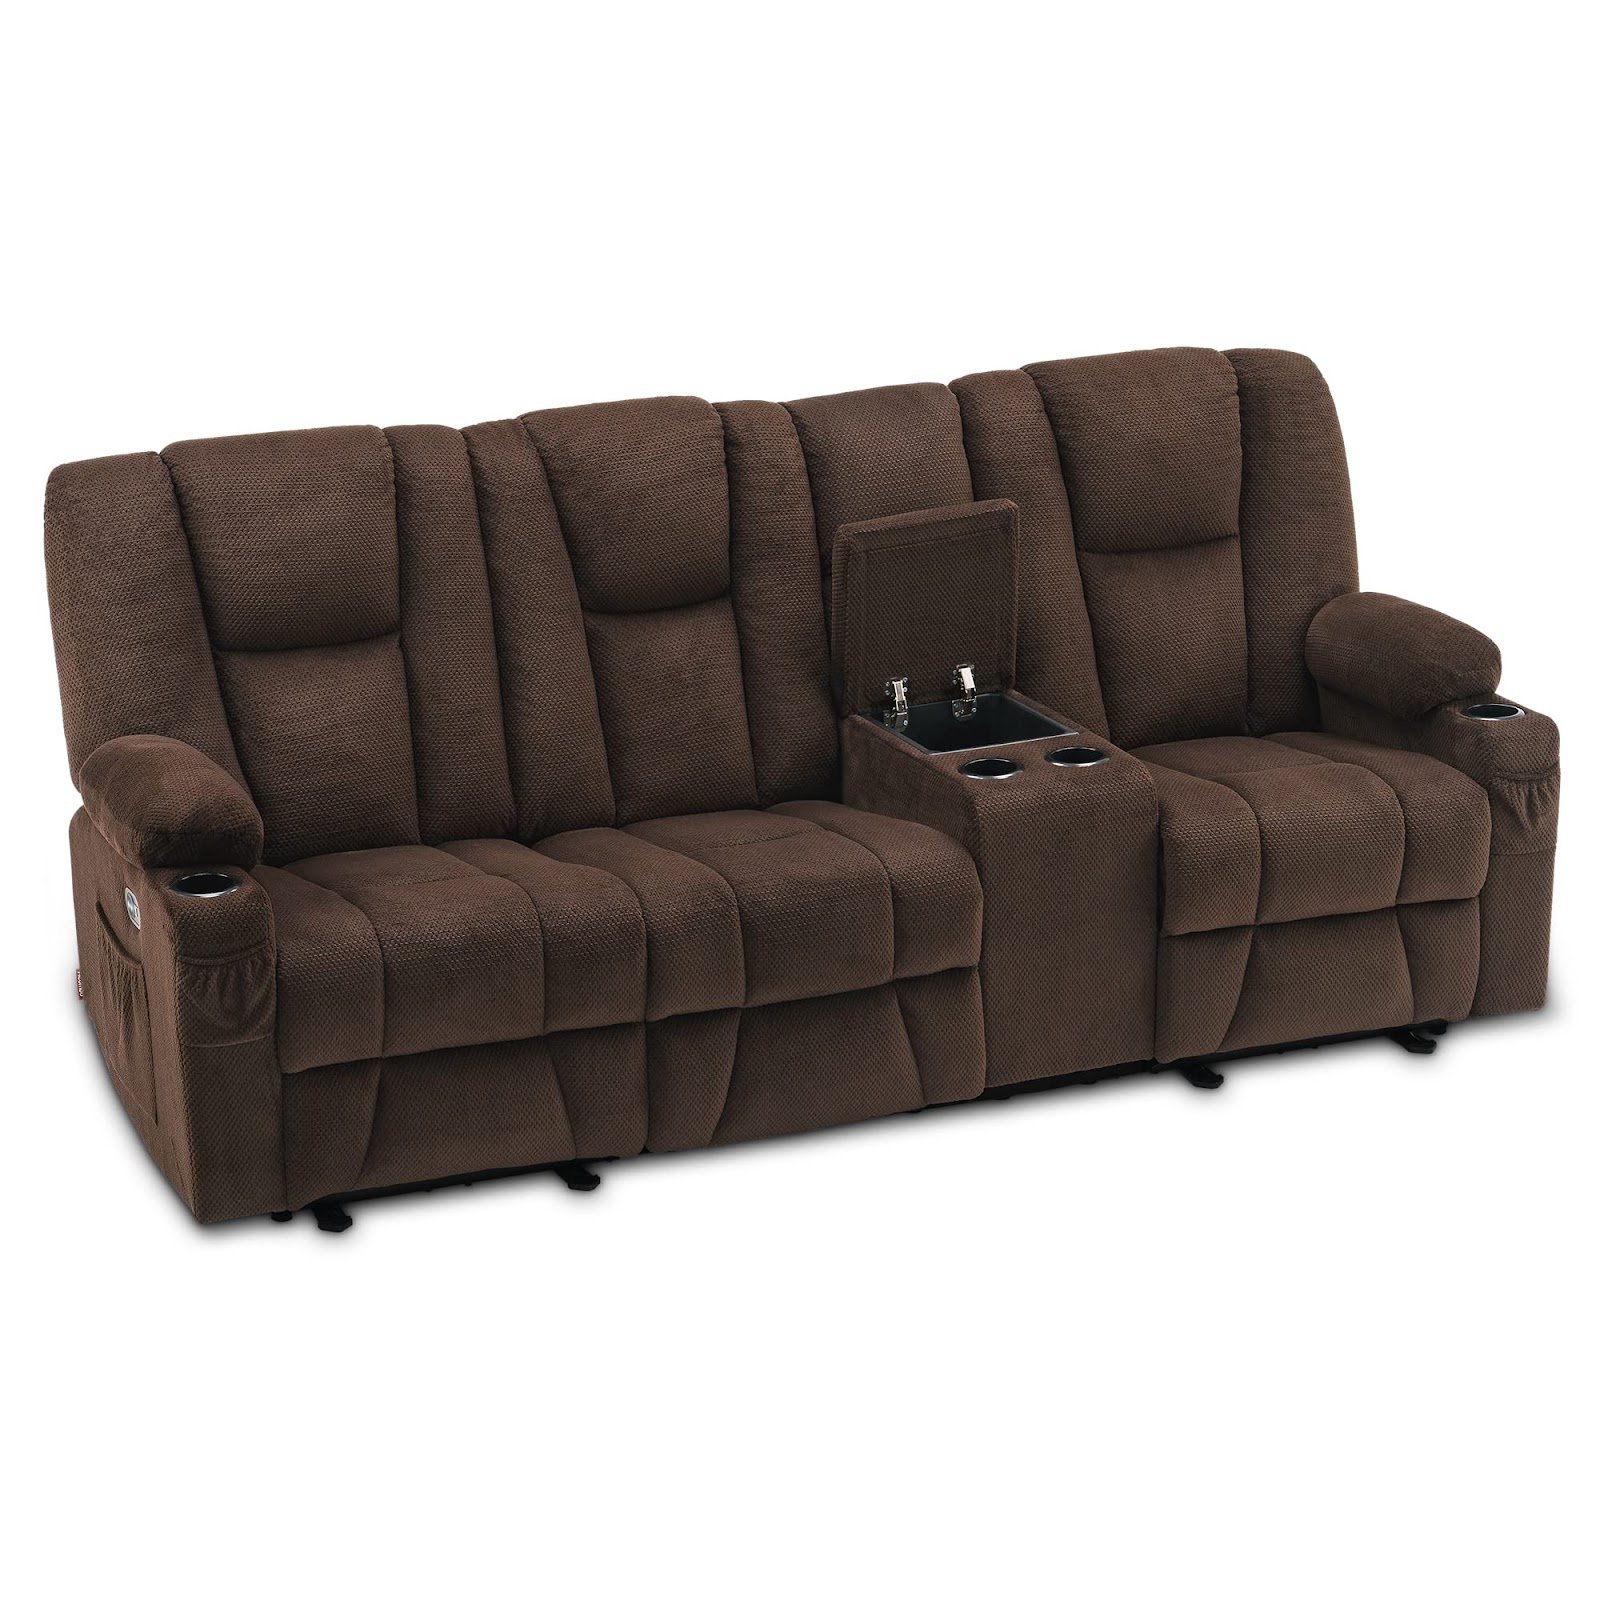 MCombo Power Reclining Sofa with Heat and Massage,USB Ports, Cup Holders,3-Seat Dual Recliner Sofa with Console for Living Room 6035 (Brown)